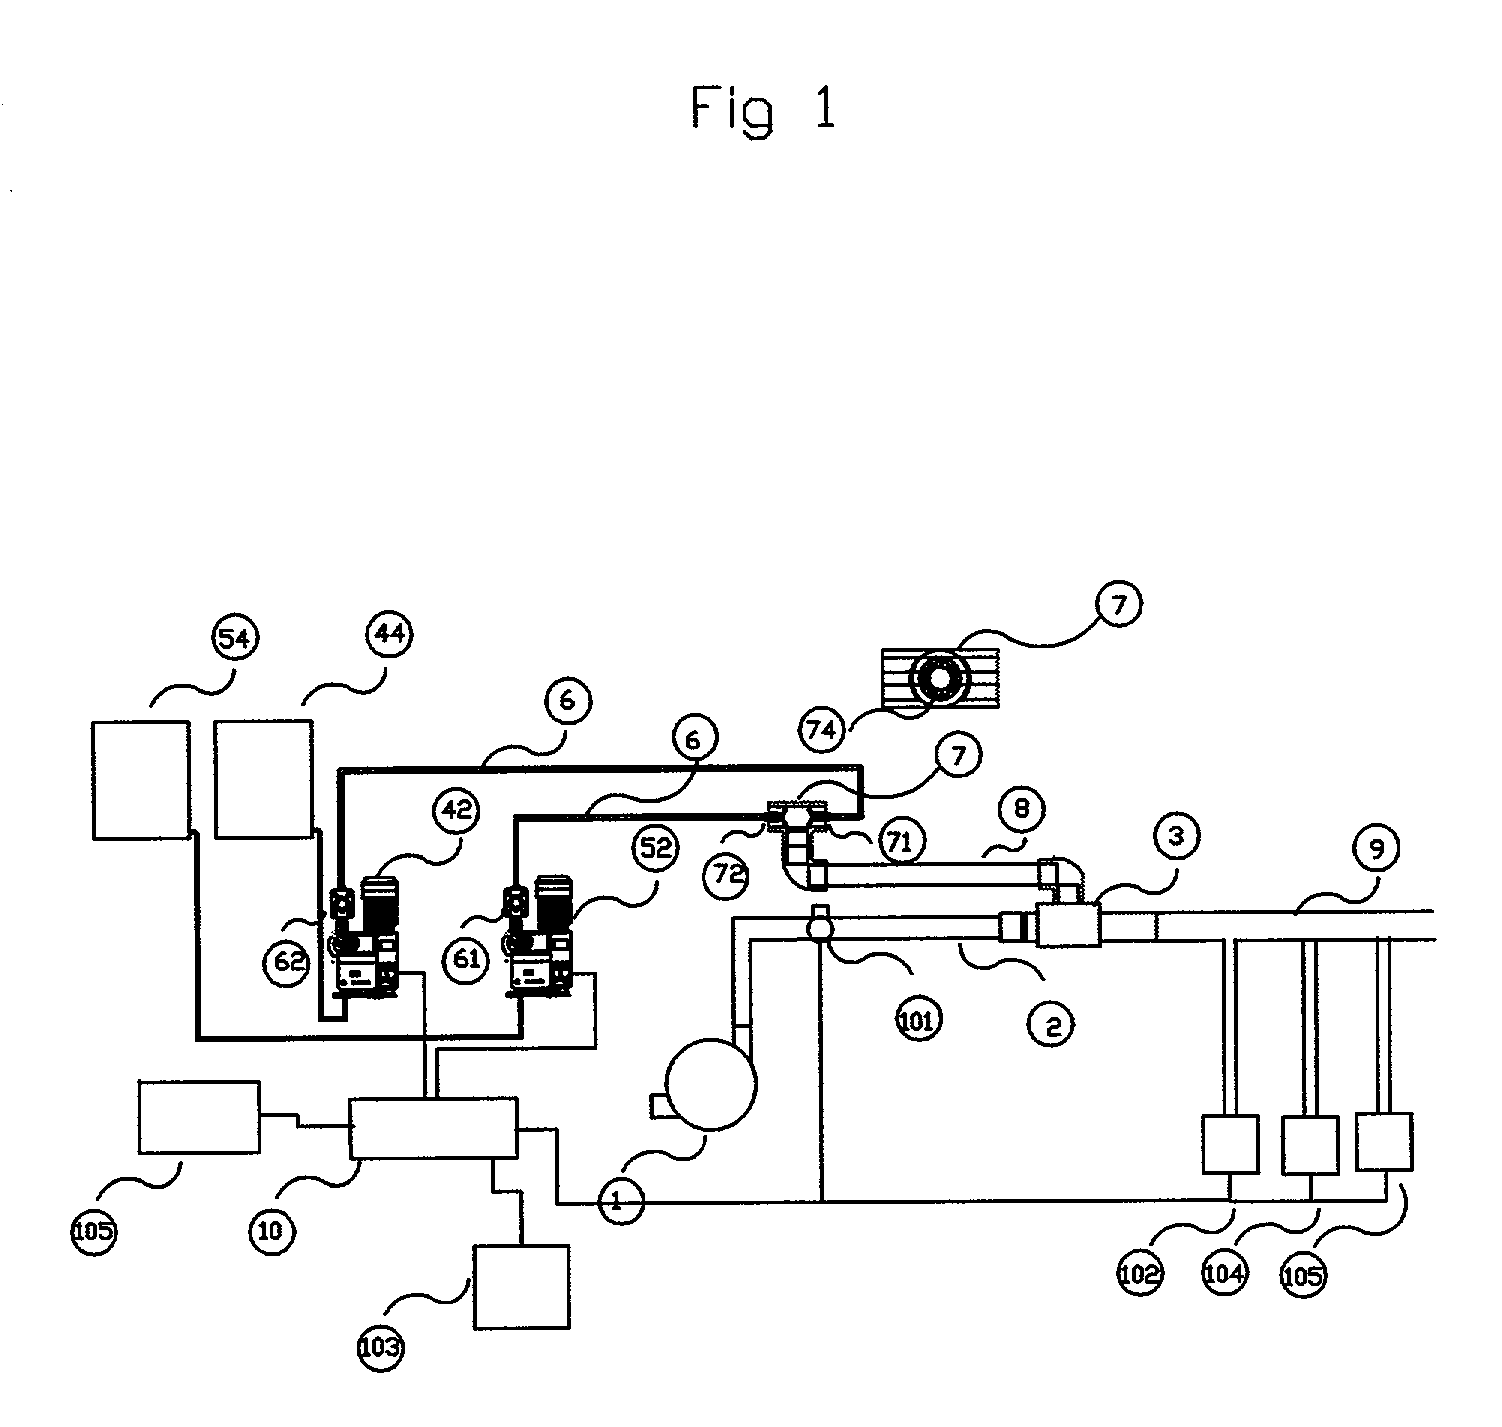 Process and apparatus for the generation of chlorine dioxide using a replenished foam system